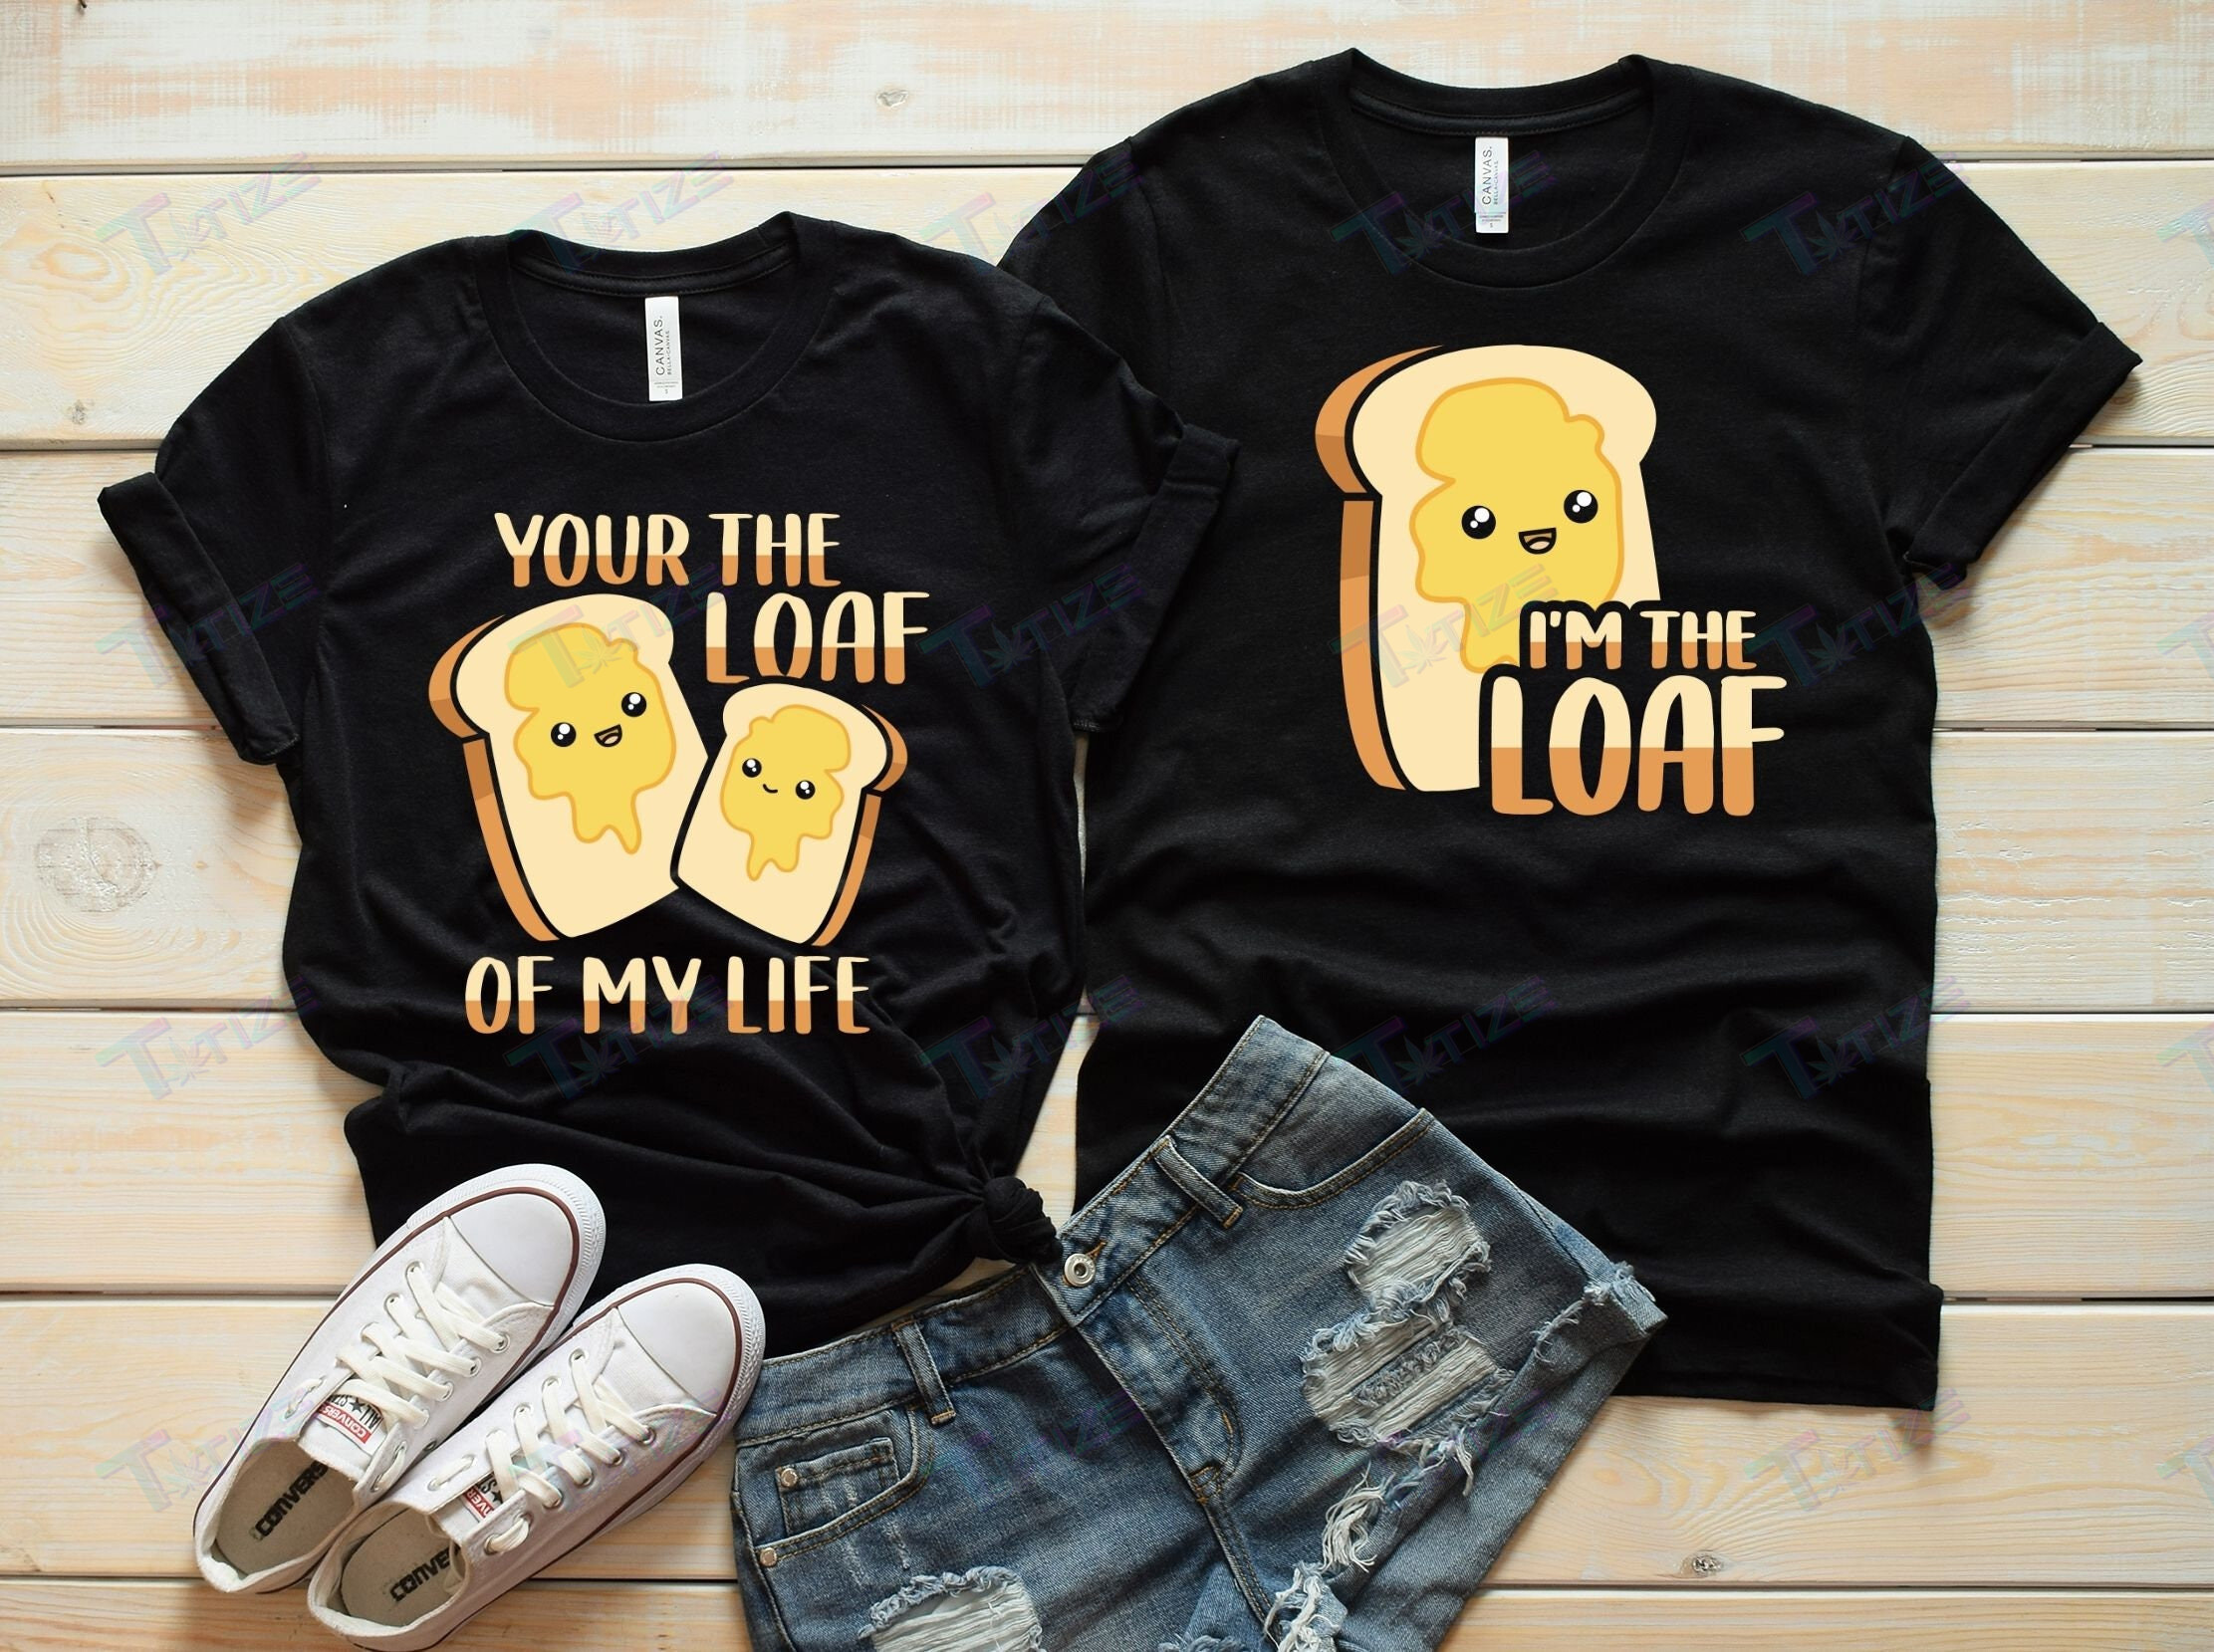 Your The Loaf Of My Life Couples Valentine 2022 Gifts Graphic Unisex T Shirt, Sweatshirt, Hoodie Size S – 5Xl